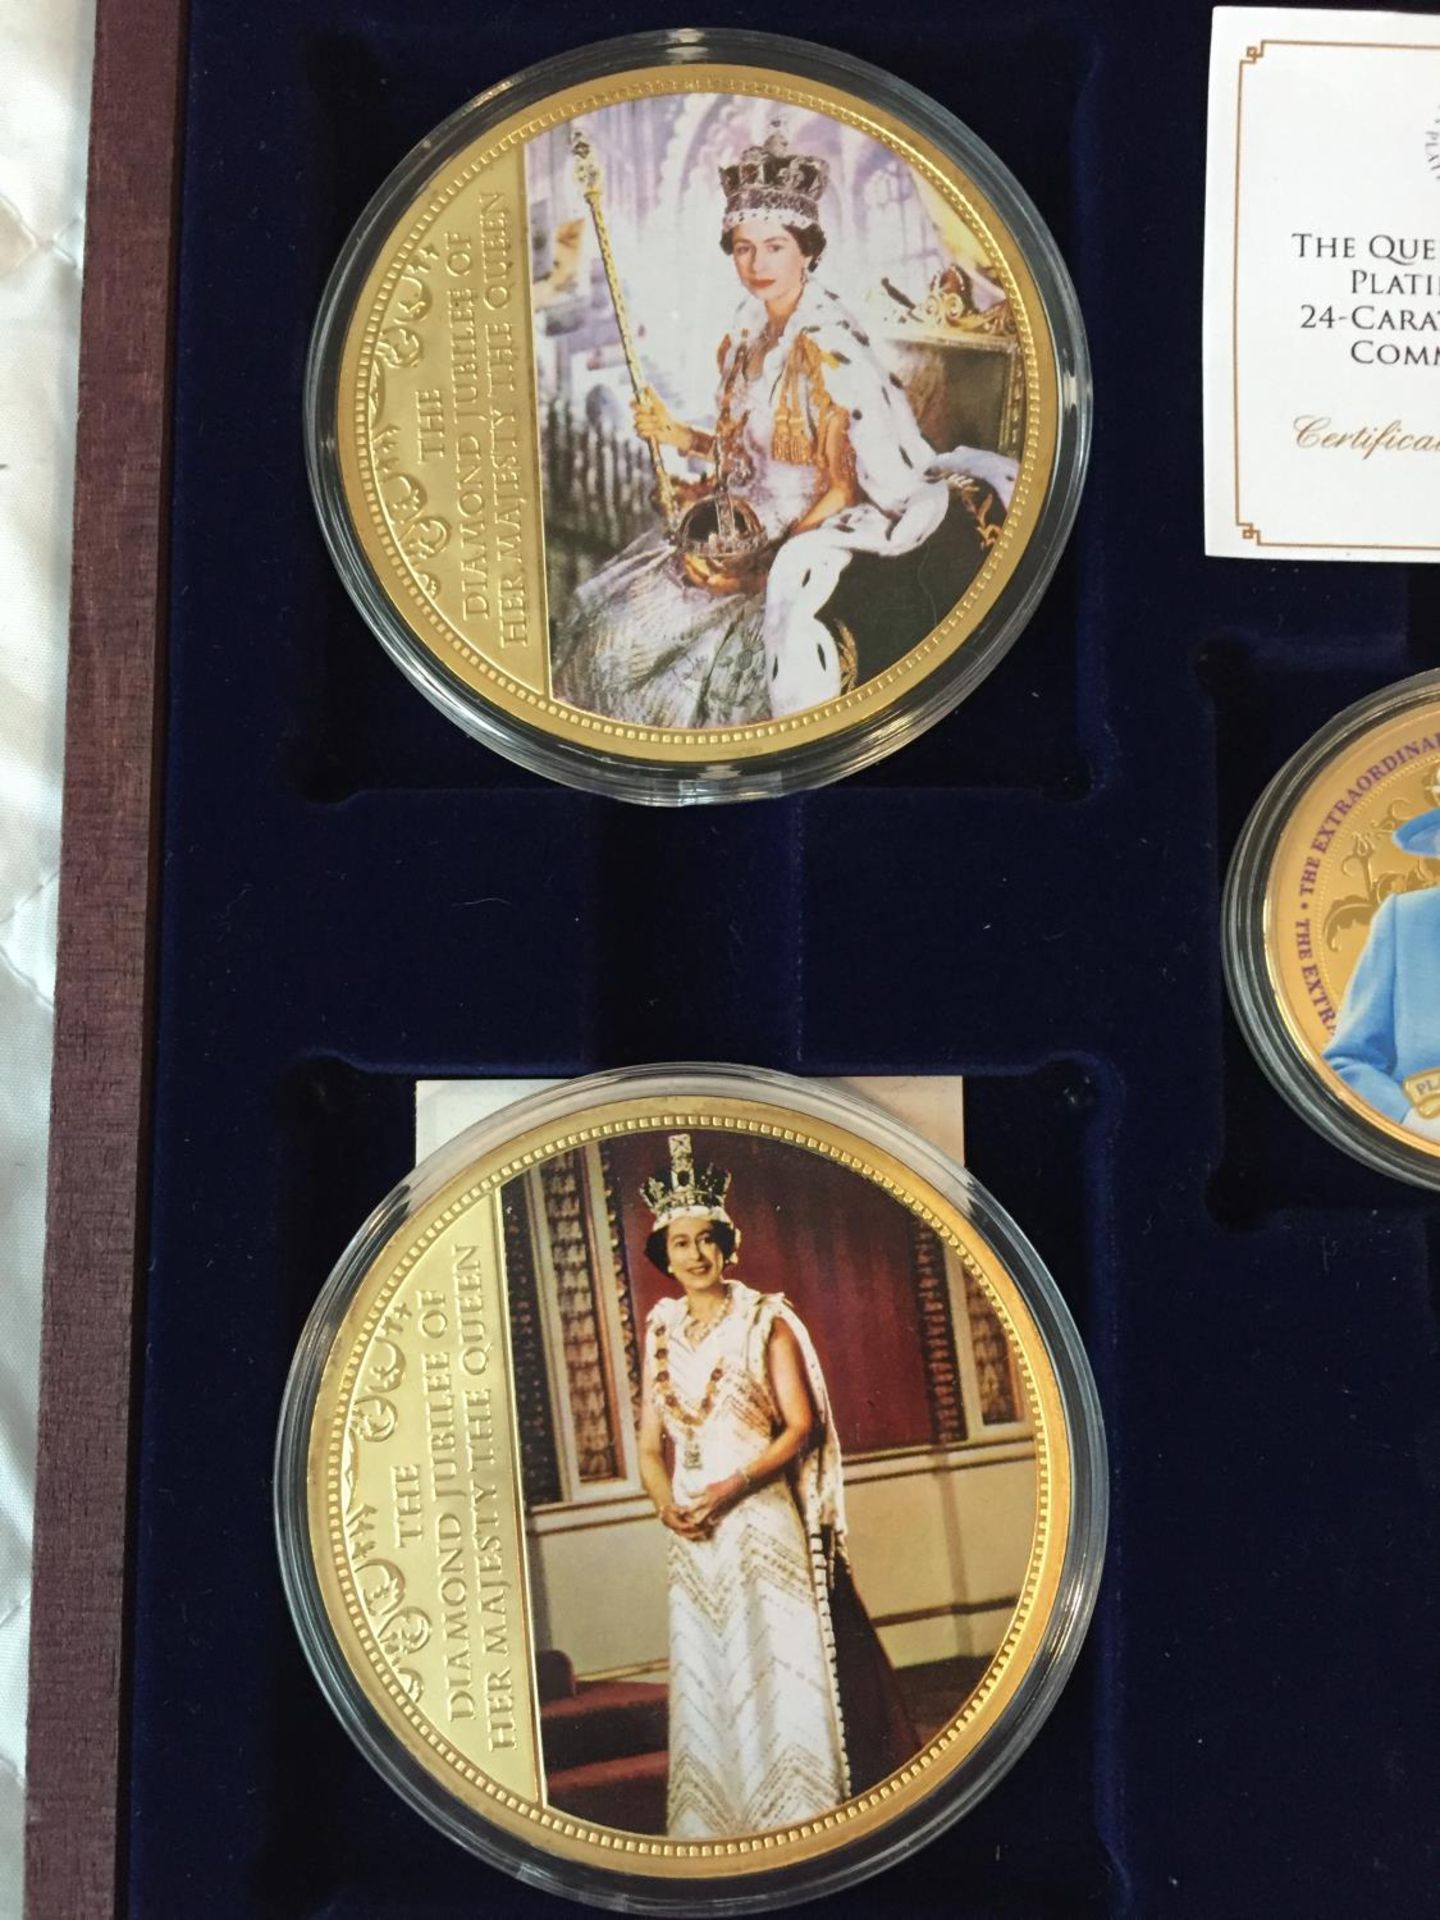 A COLLECTION OF VARIOUS COMMEMORATIVE COINS TO INCLUDE THE QUEEN ELIZABETH II PLATINUM JUBILEE 24 - Image 3 of 4